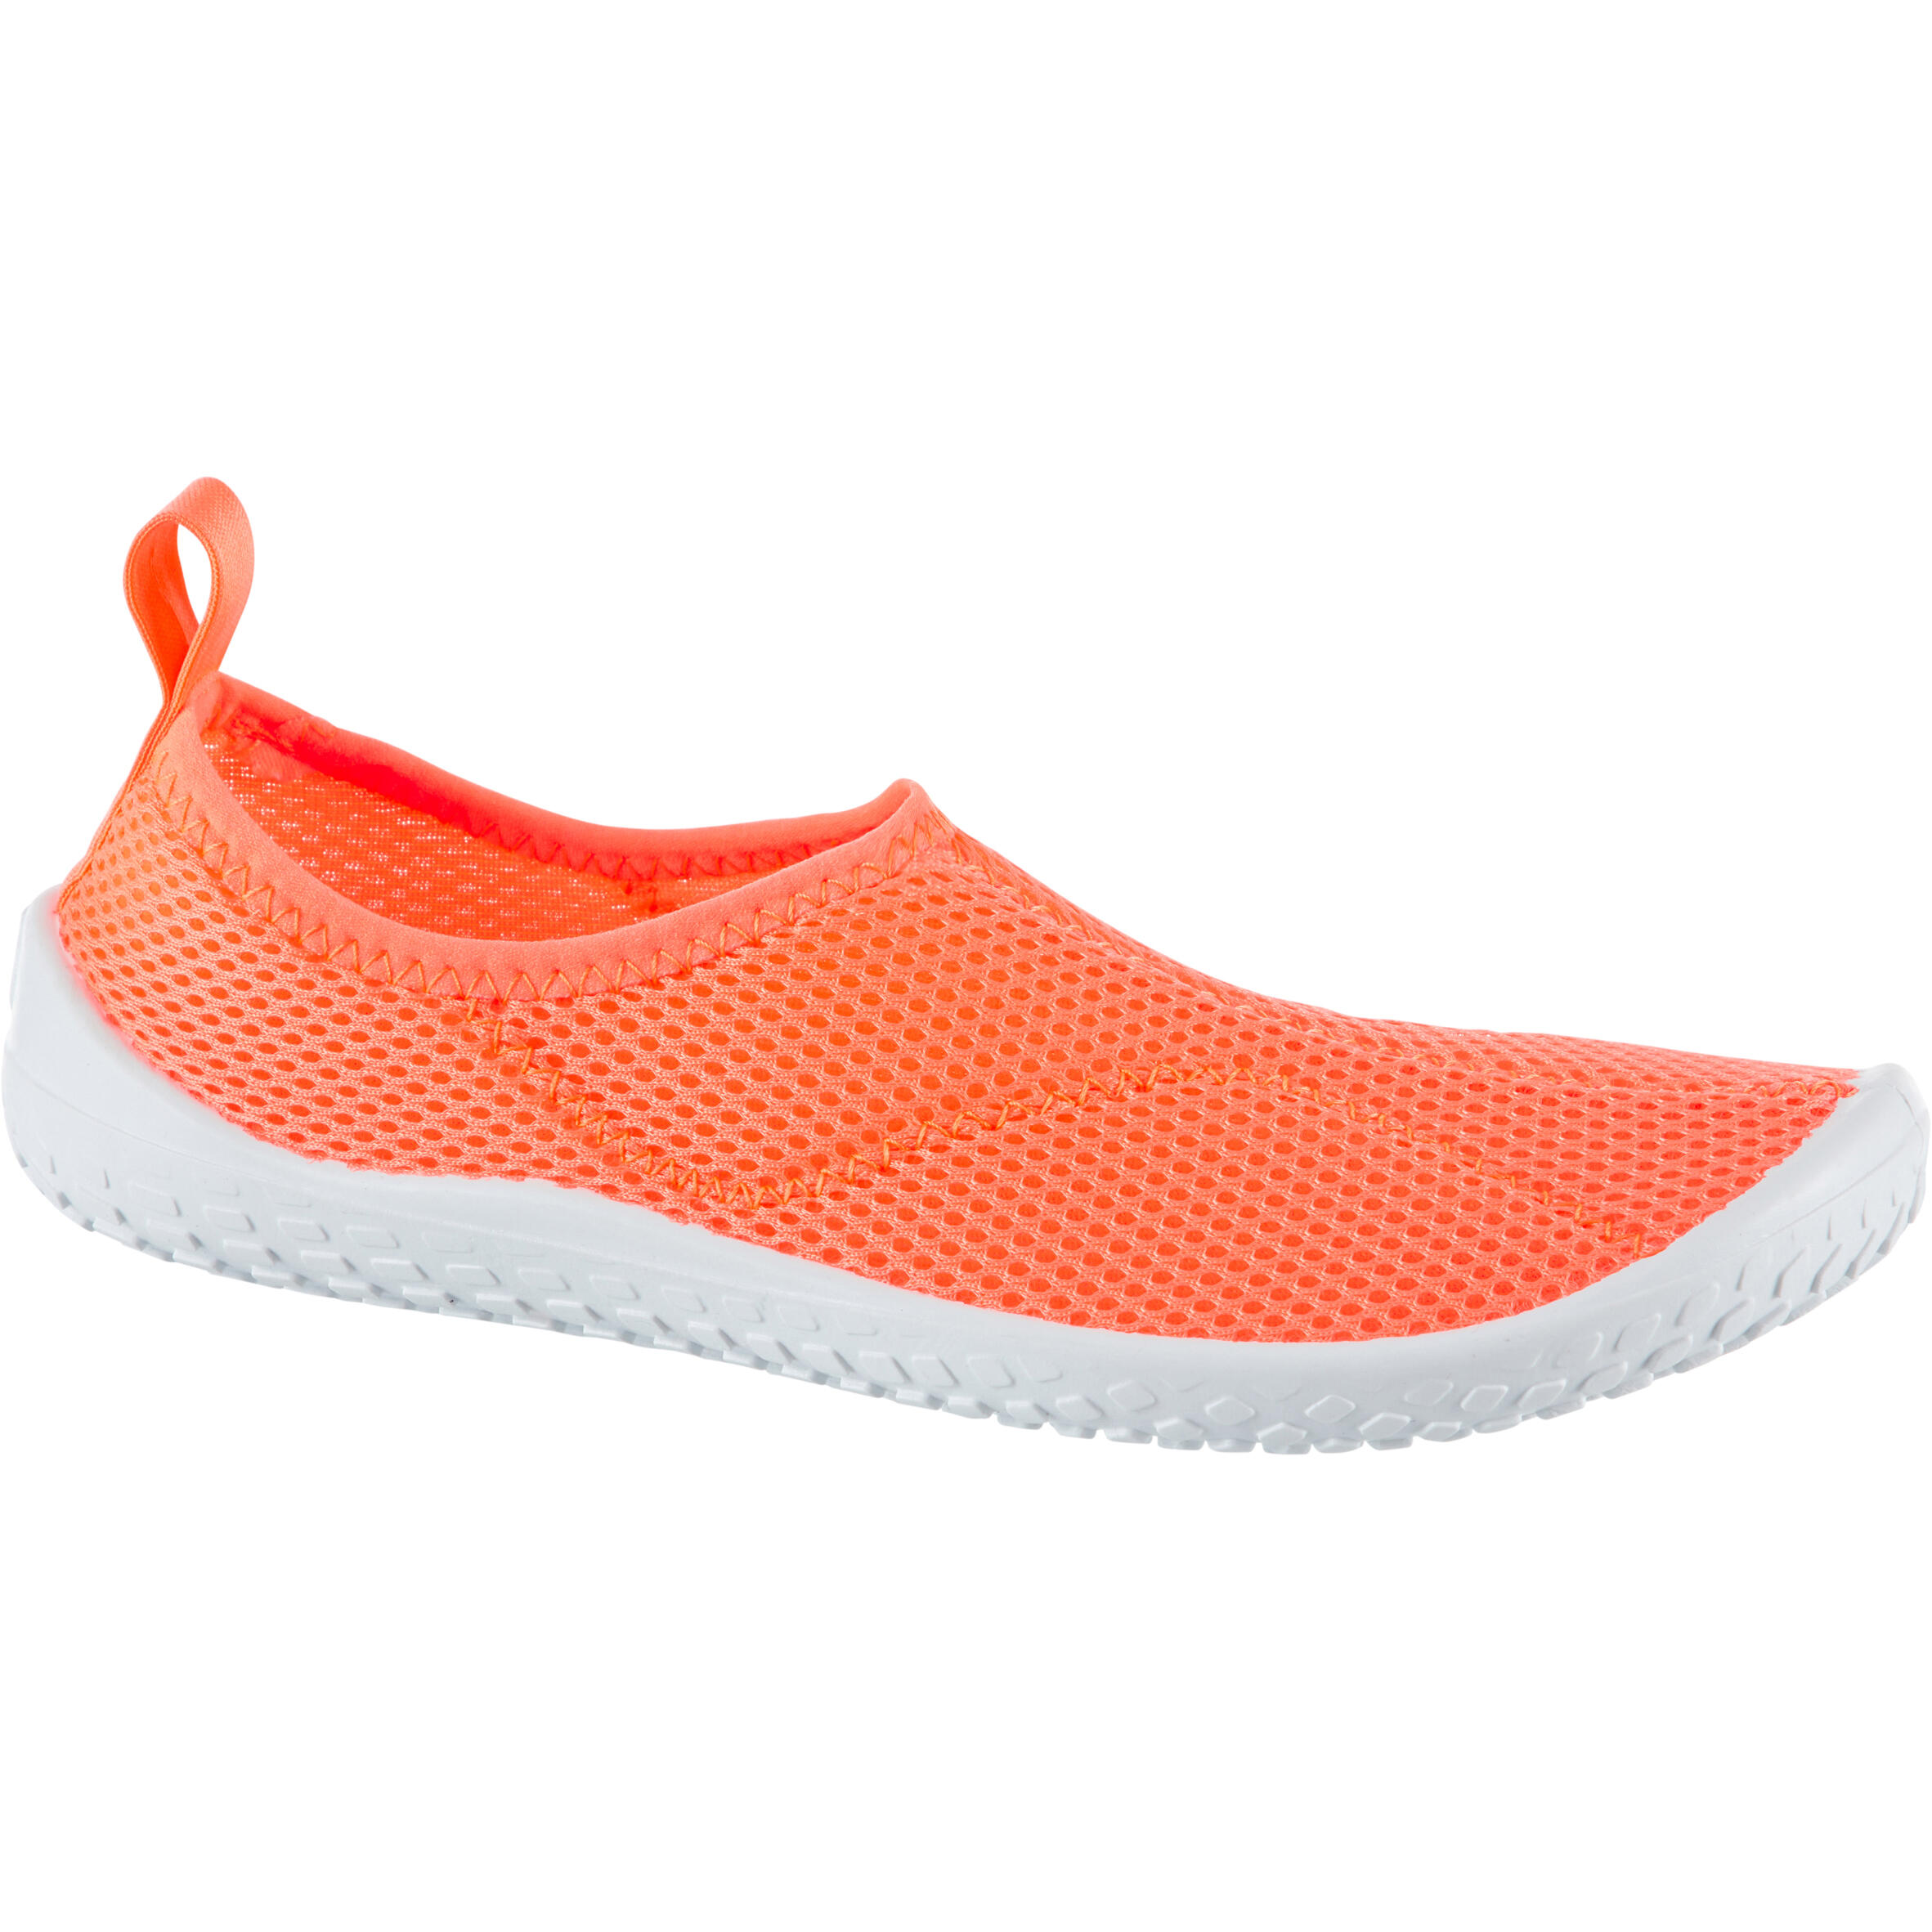 100 Kids' Water Shoes Coral - Decathlon